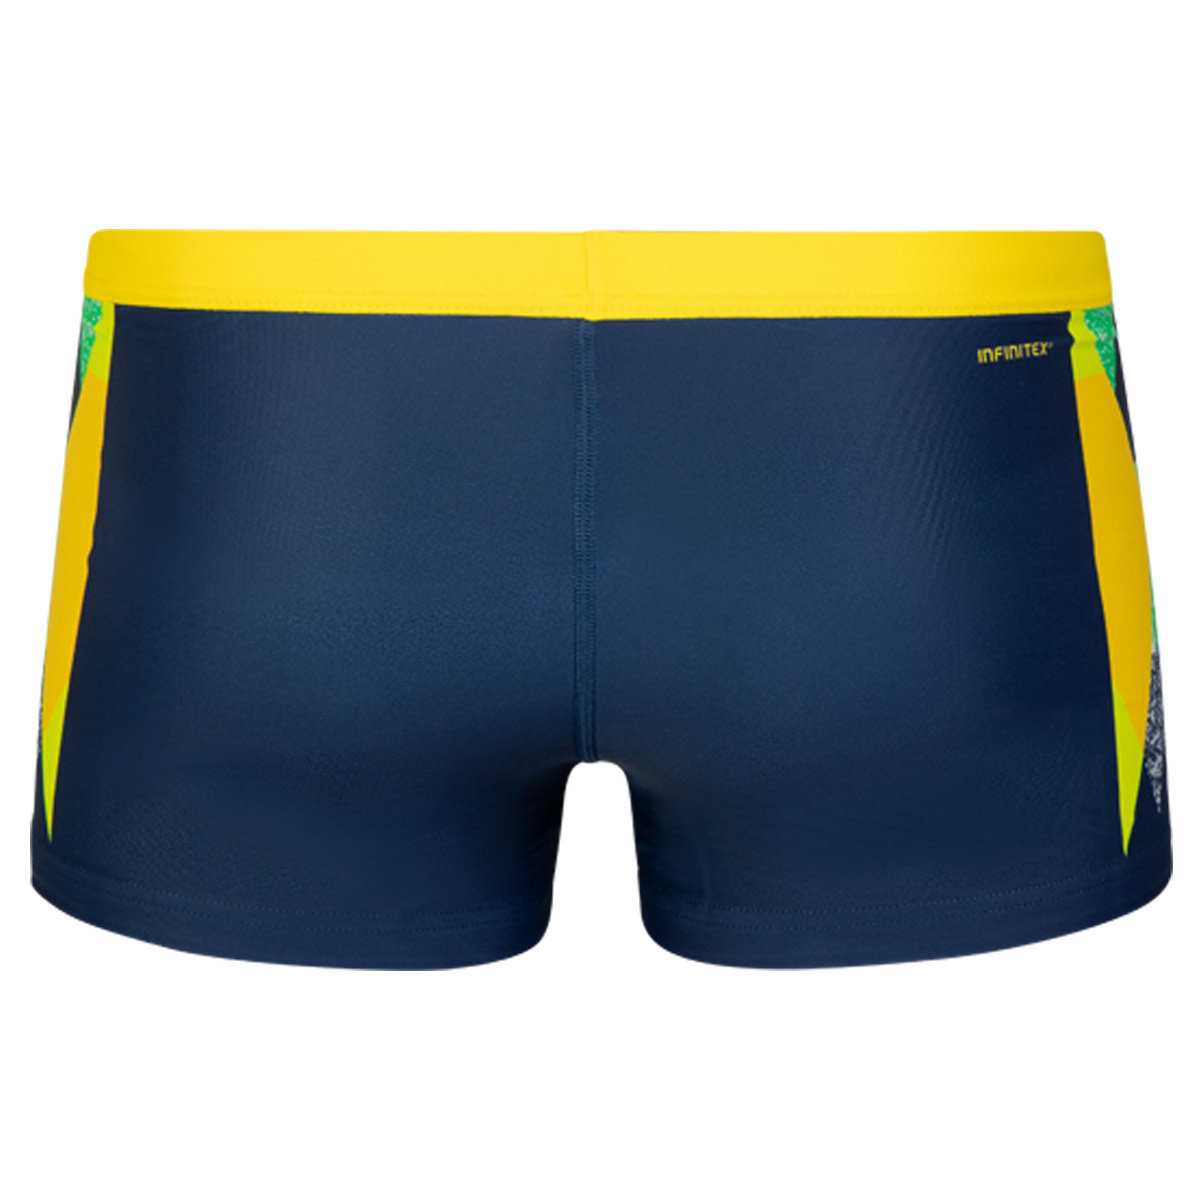 Adidas Graphic Trunks - Yellow/ Lime